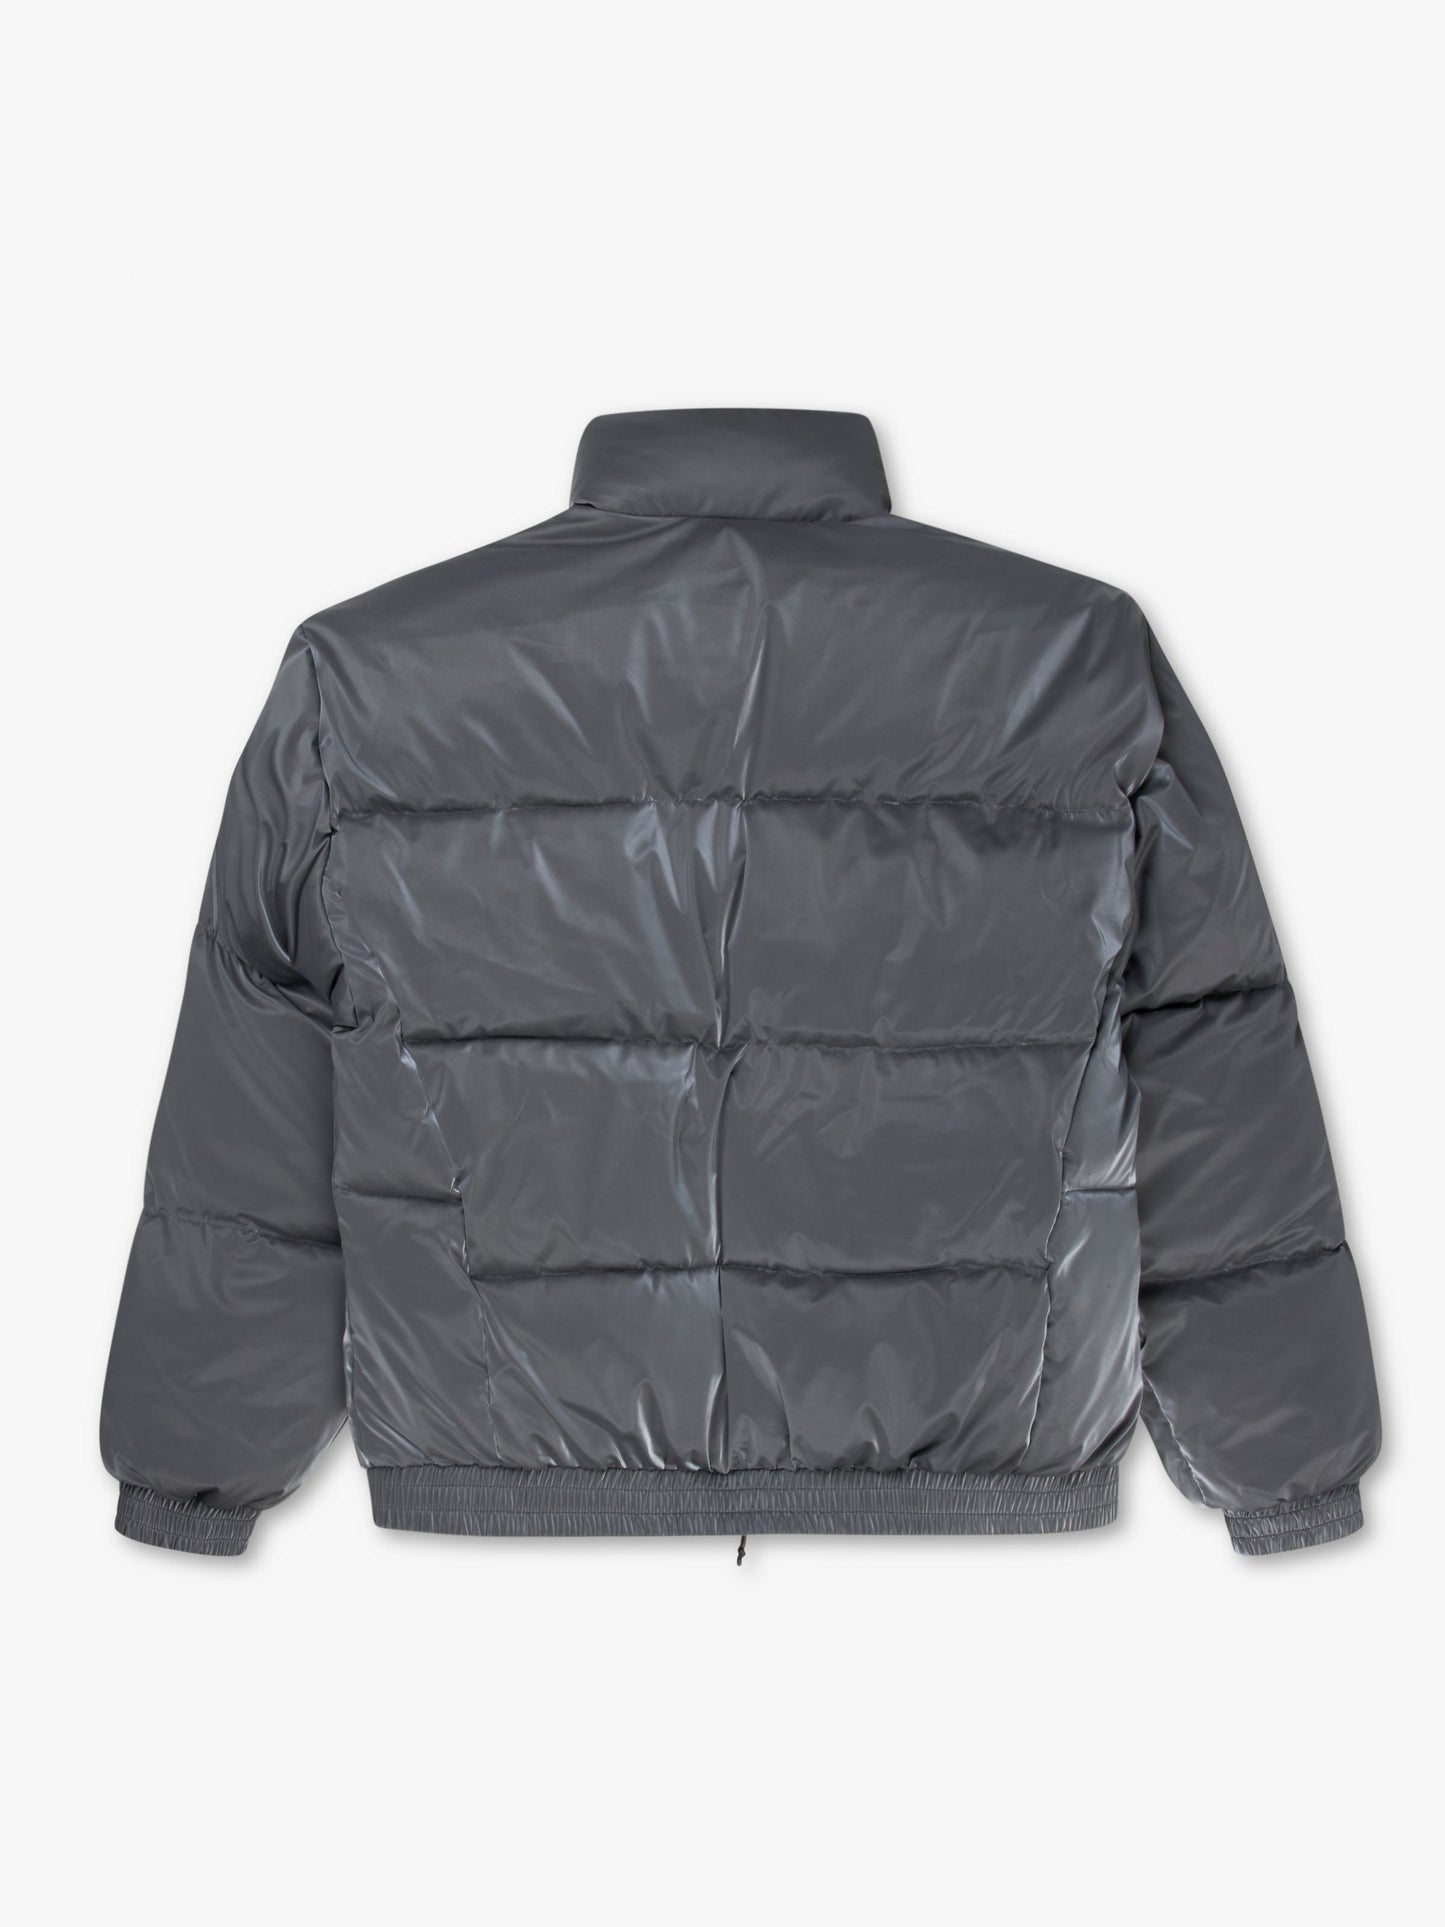 7 DAYS Recycled Tech Puffer Outerwear 529 Excalibur